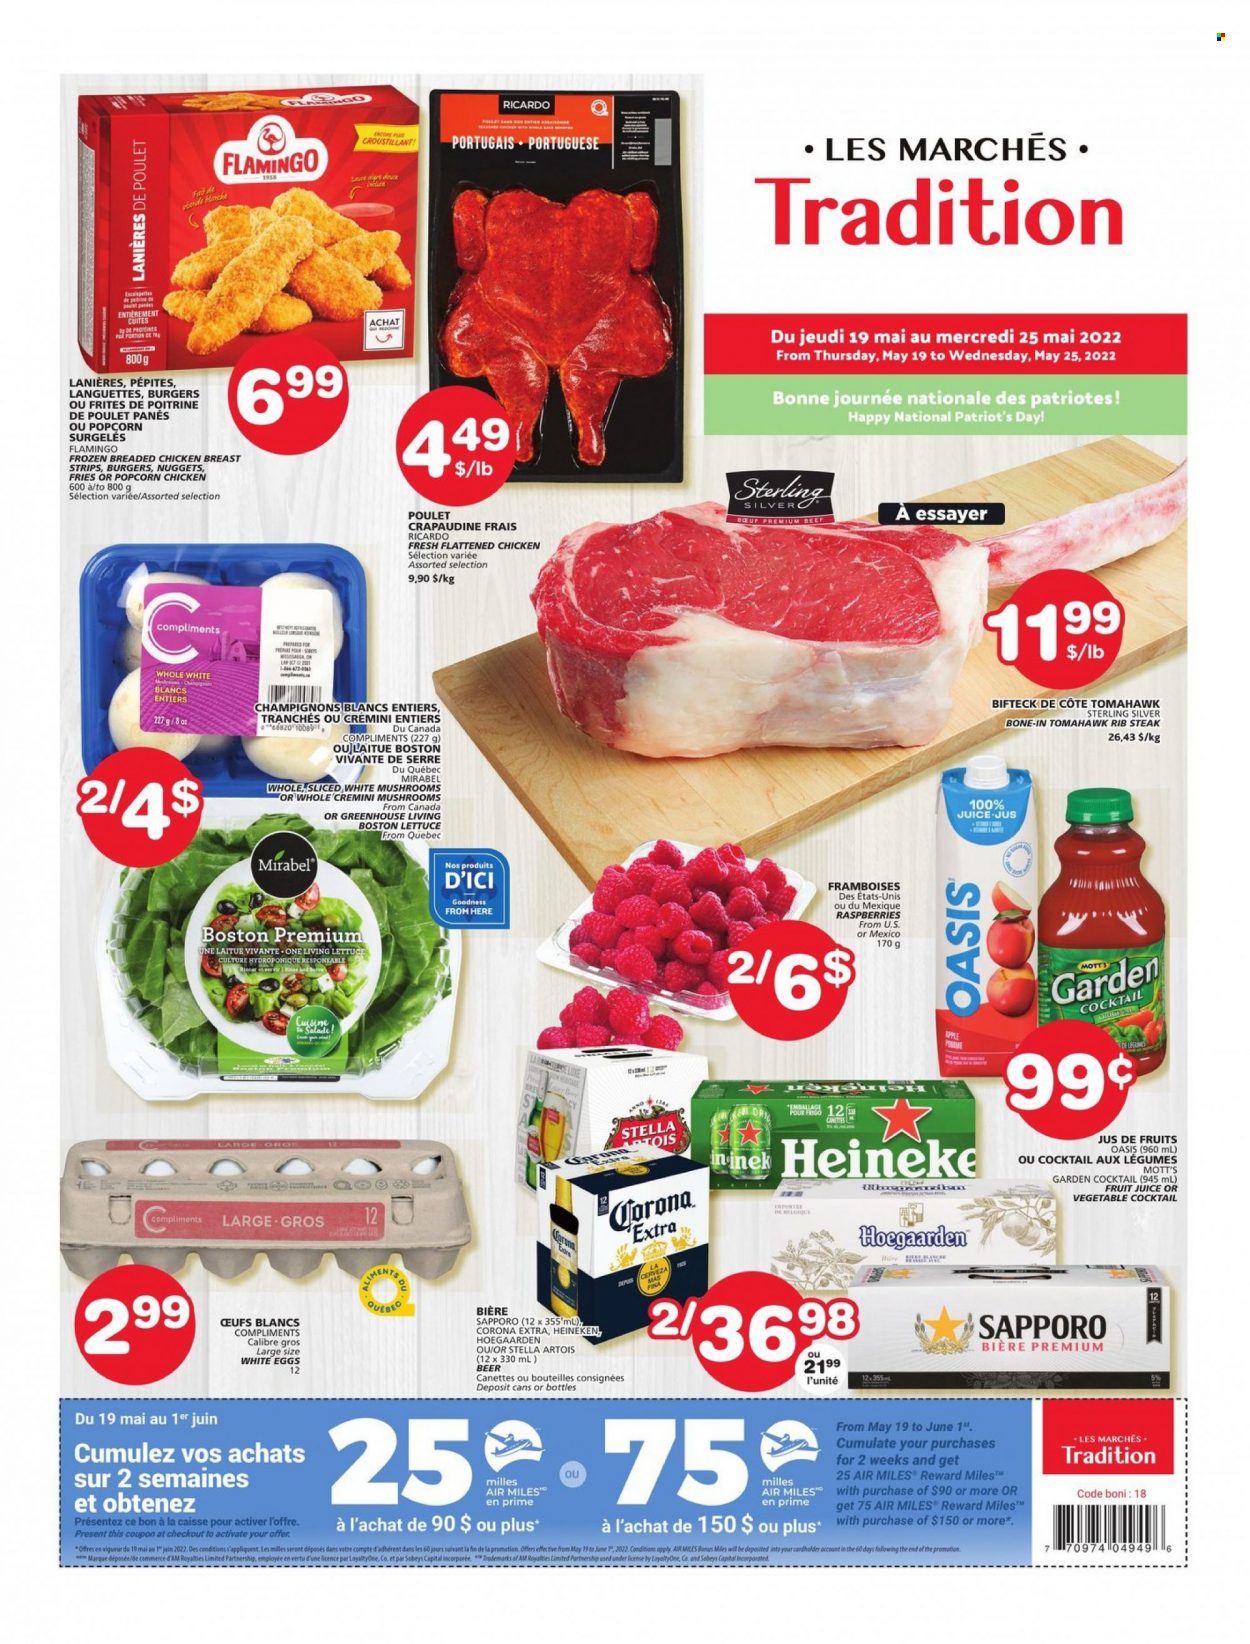 Les Marchés Tradition flyer  - May 19, 2022 - May 25, 2022.